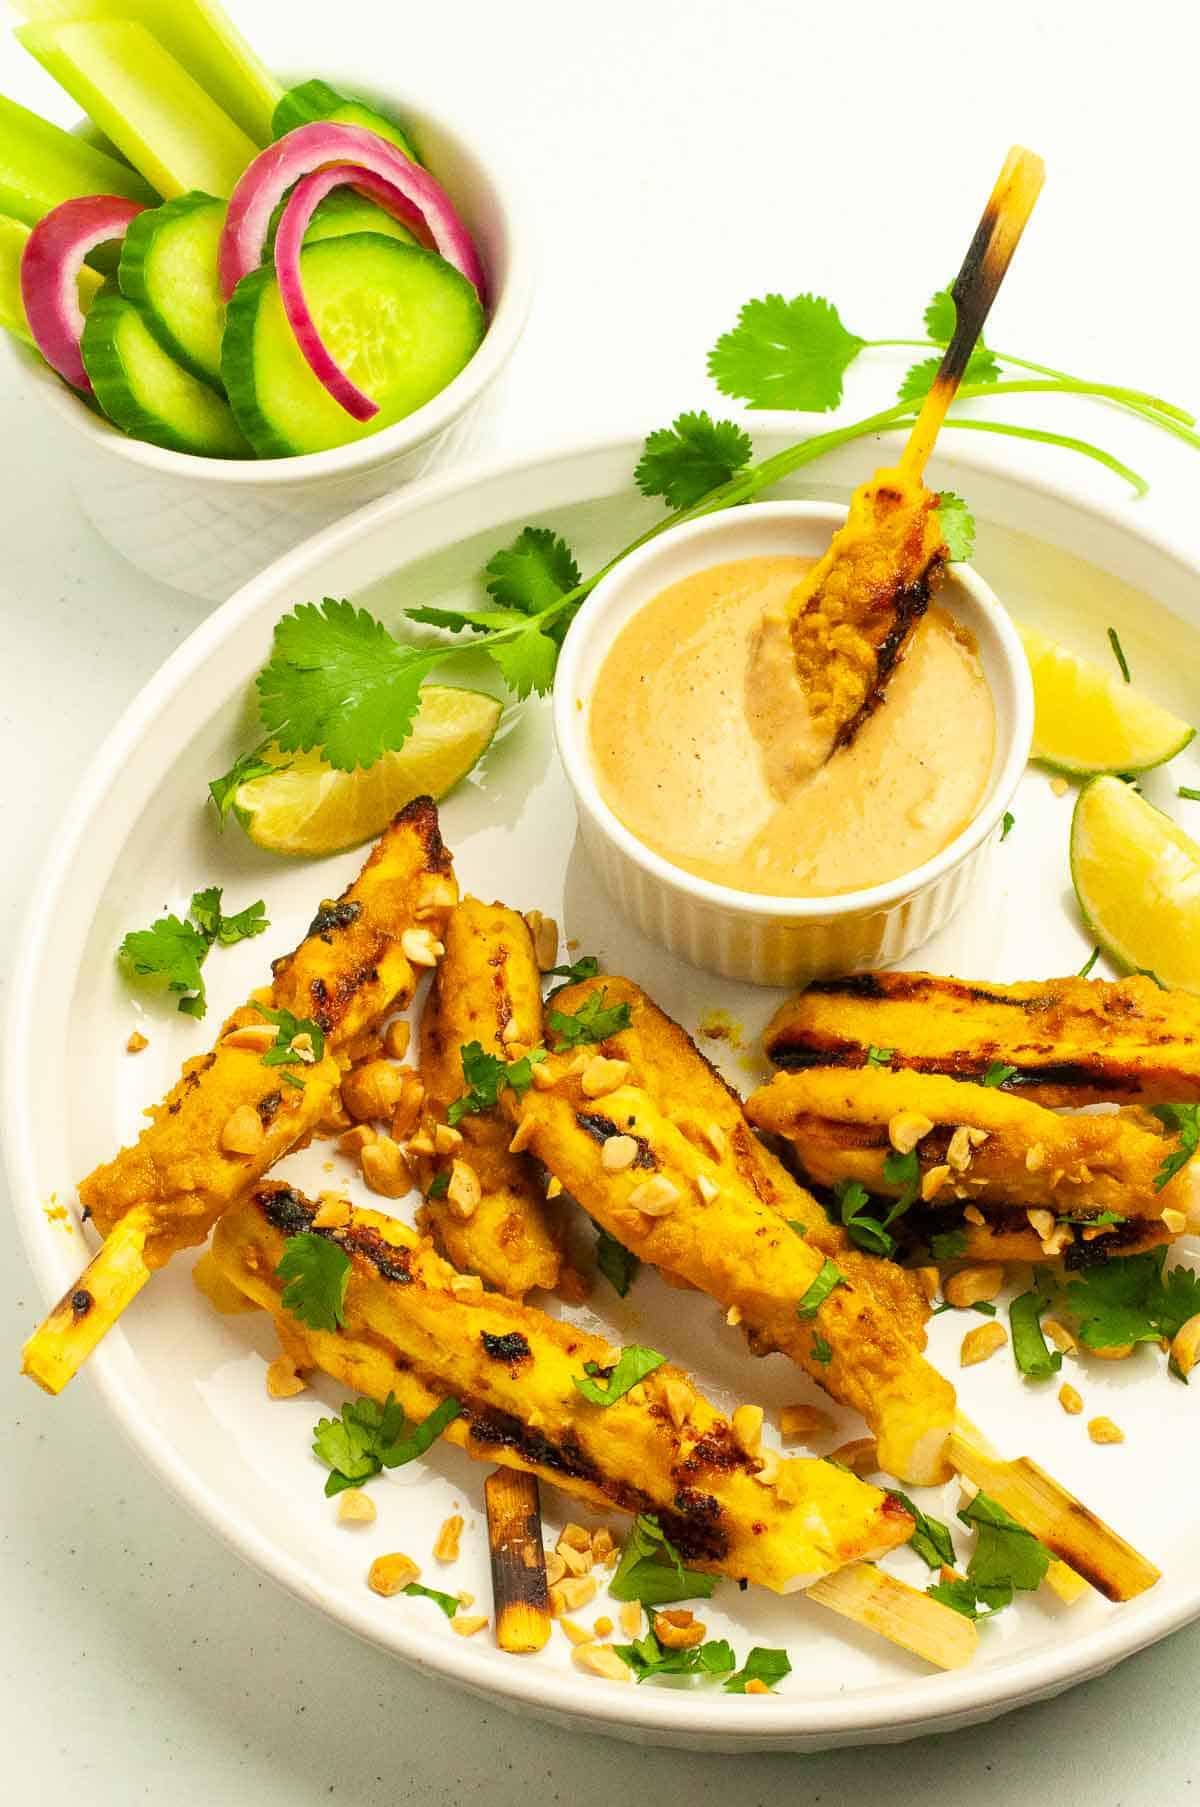 Chicken satay skewers with a bowl of peanut sauce.